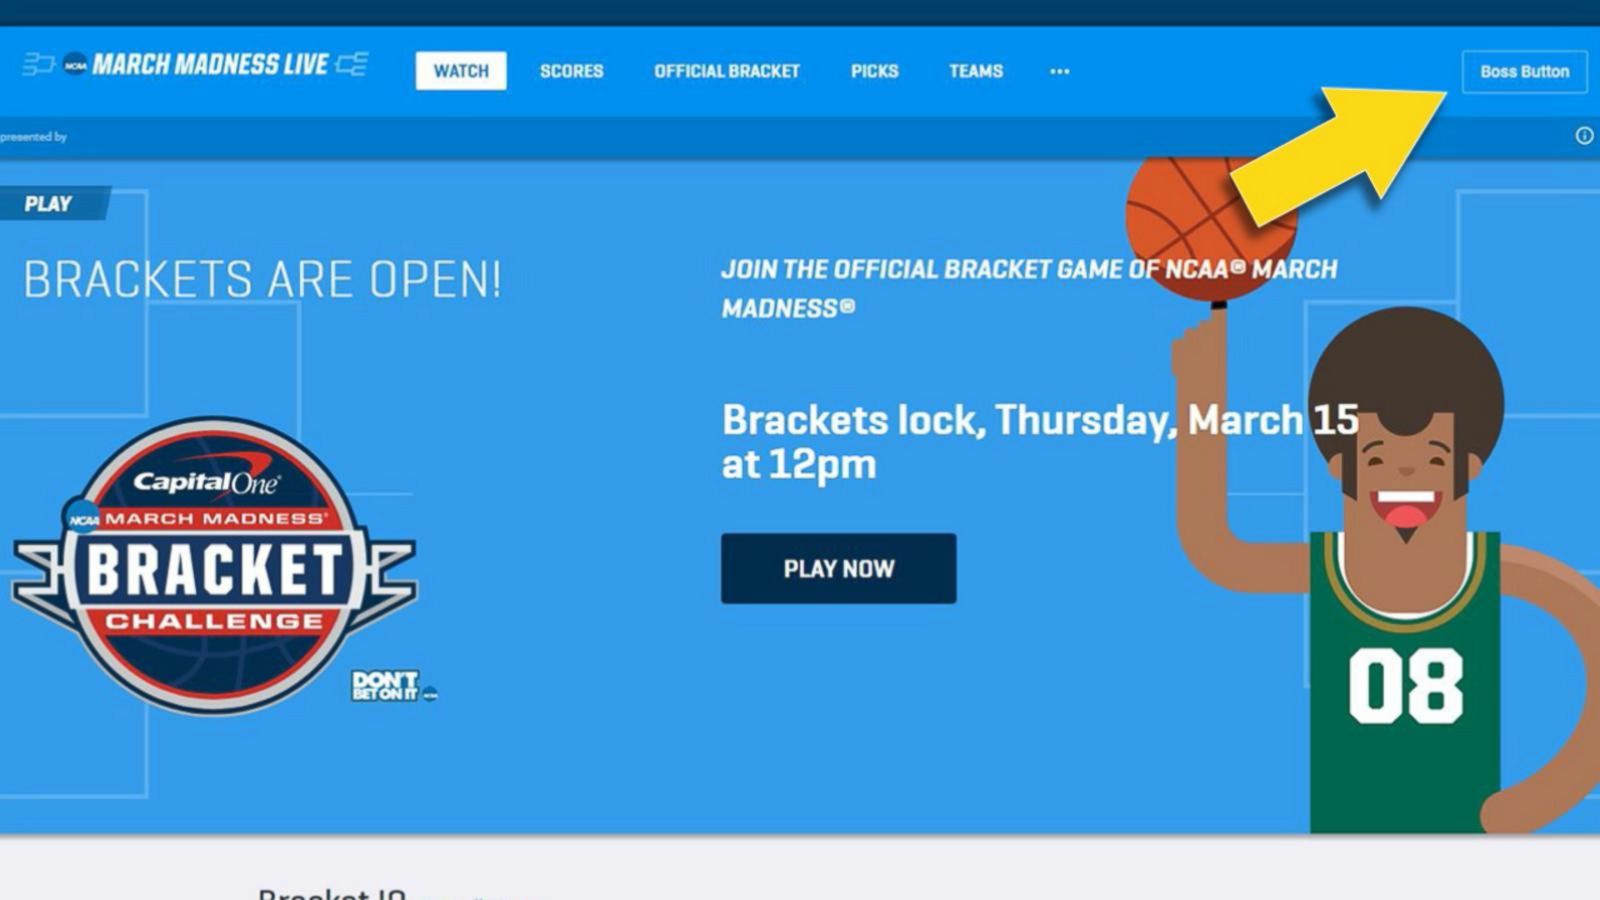 VIDEO: What to know about March Madness